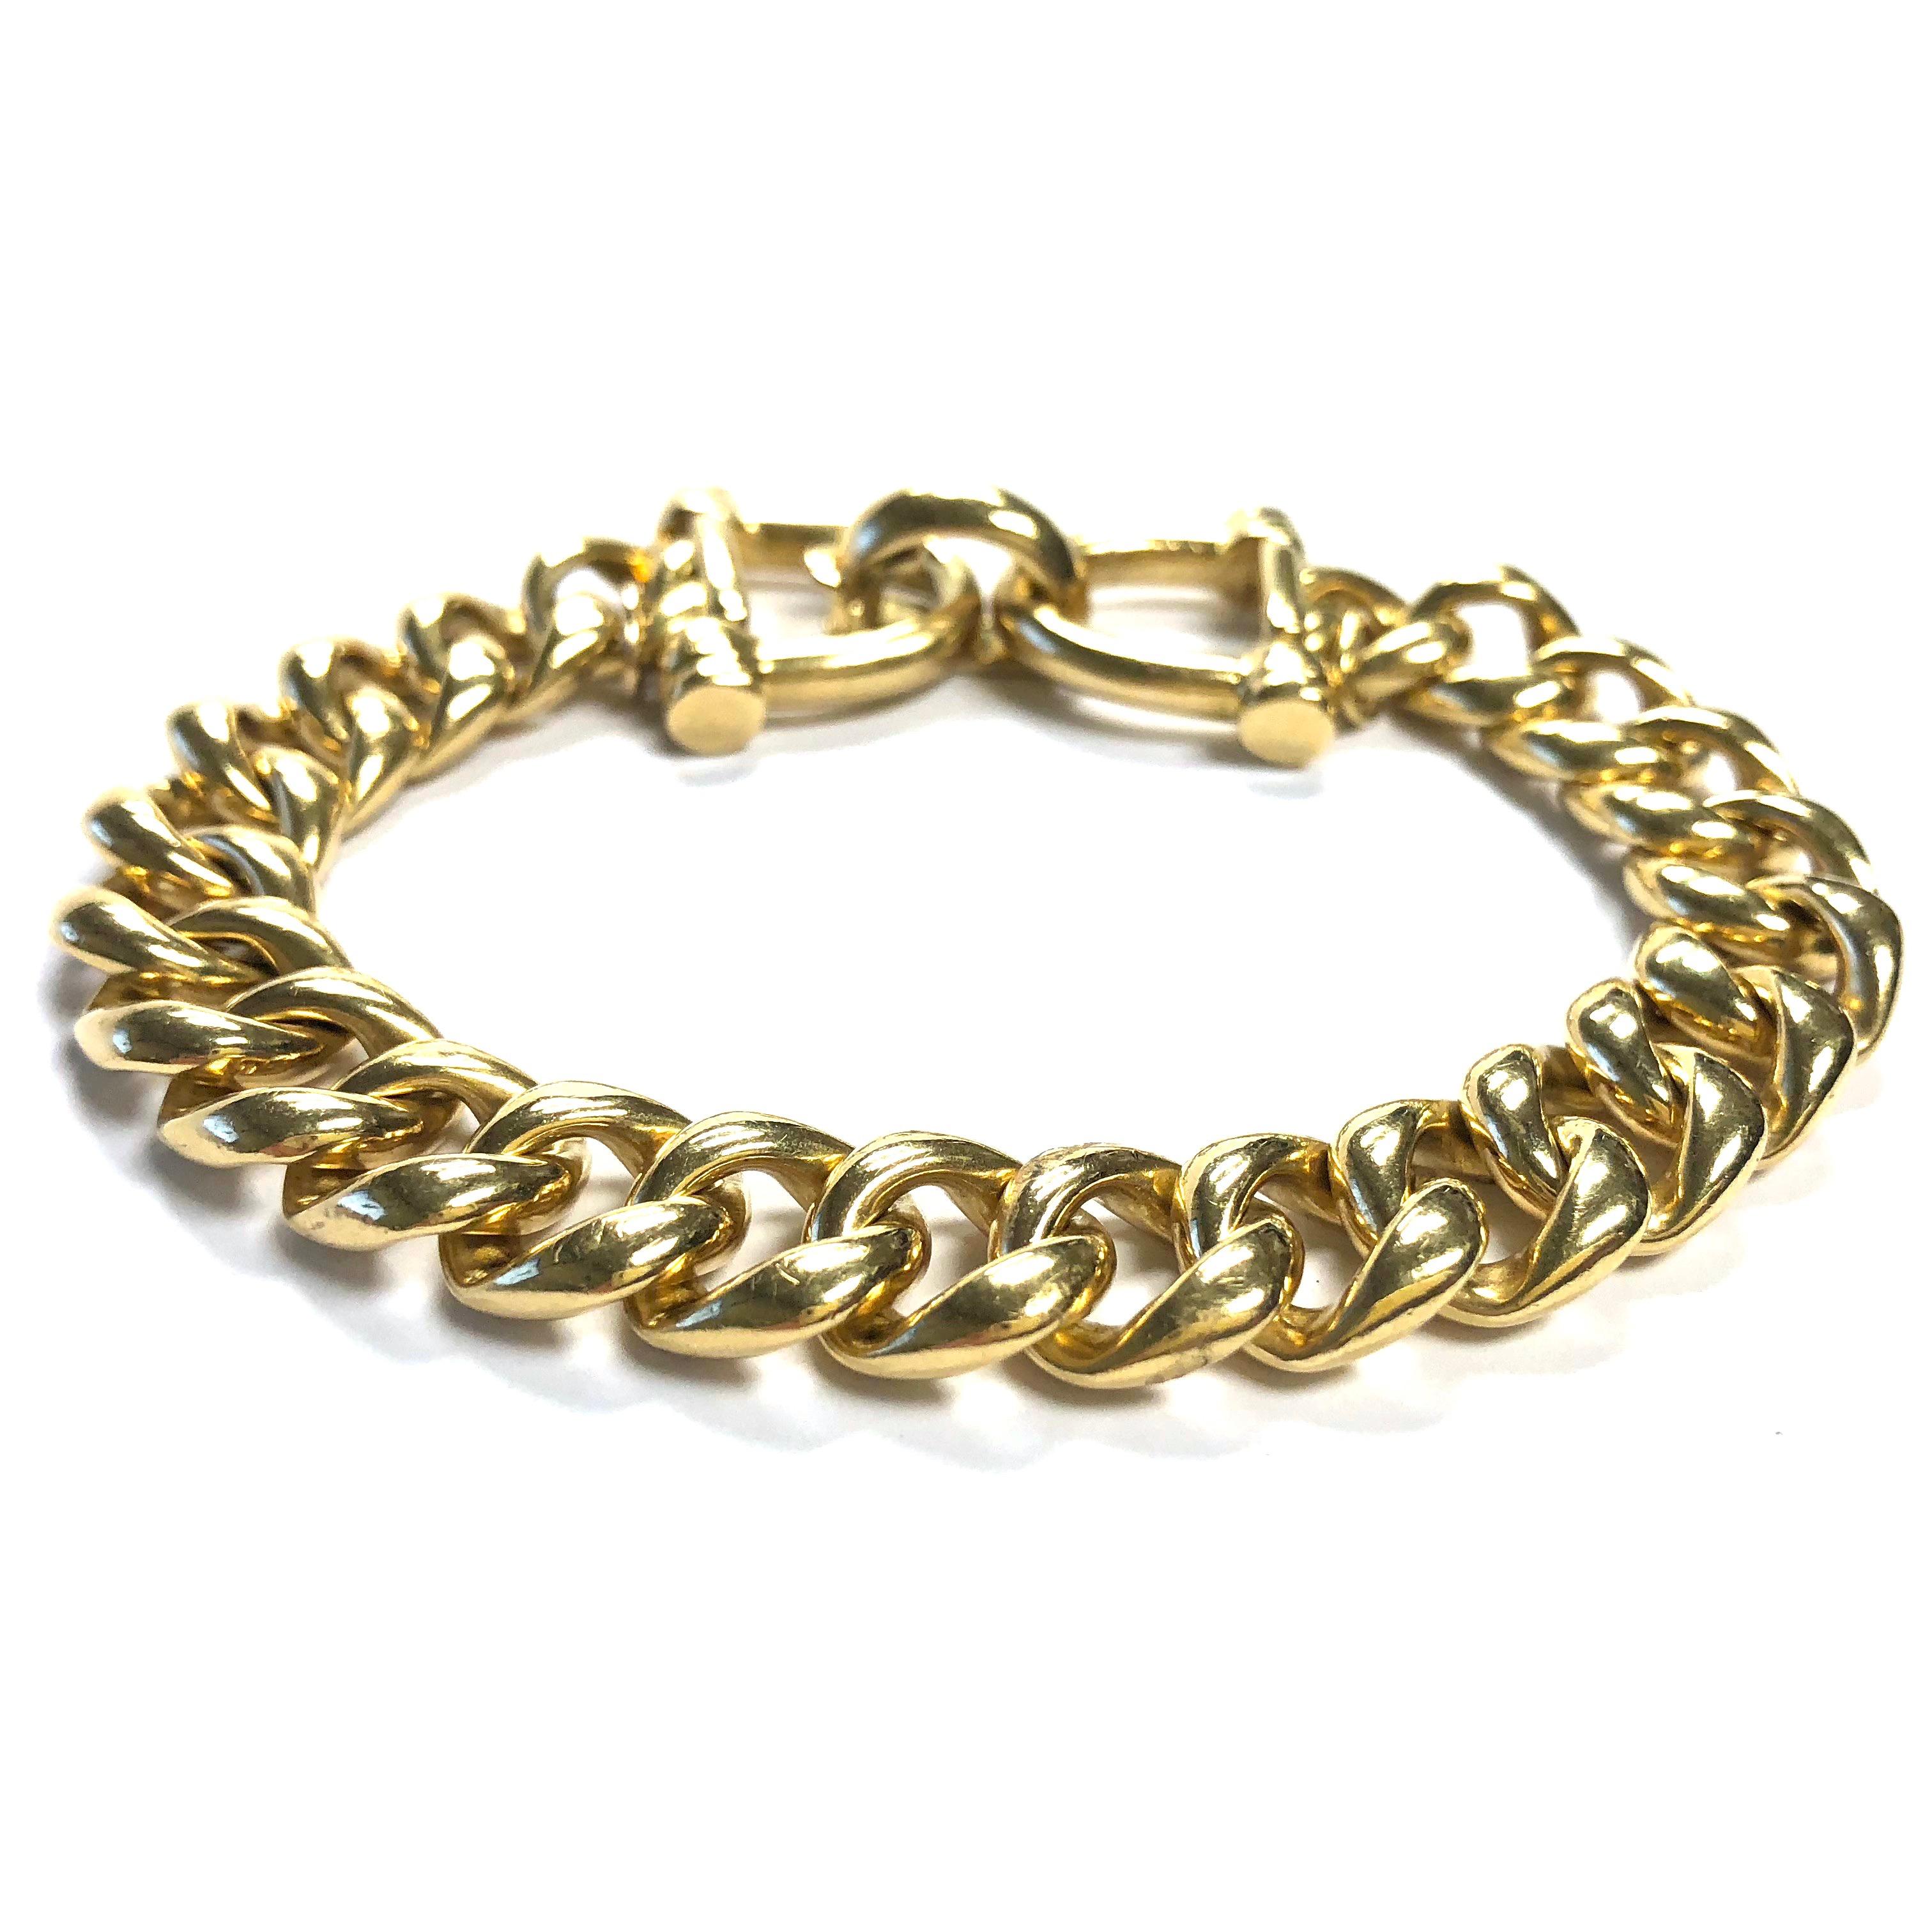 Vintage Tiffany & Co bracelet, featuring two horse bit style link at each end connected by of a series of 18K solid gold curb links. High polish finish.
Eight and one quarter inch length terminating in a fold-over clasp. Bracelet width: 7/16